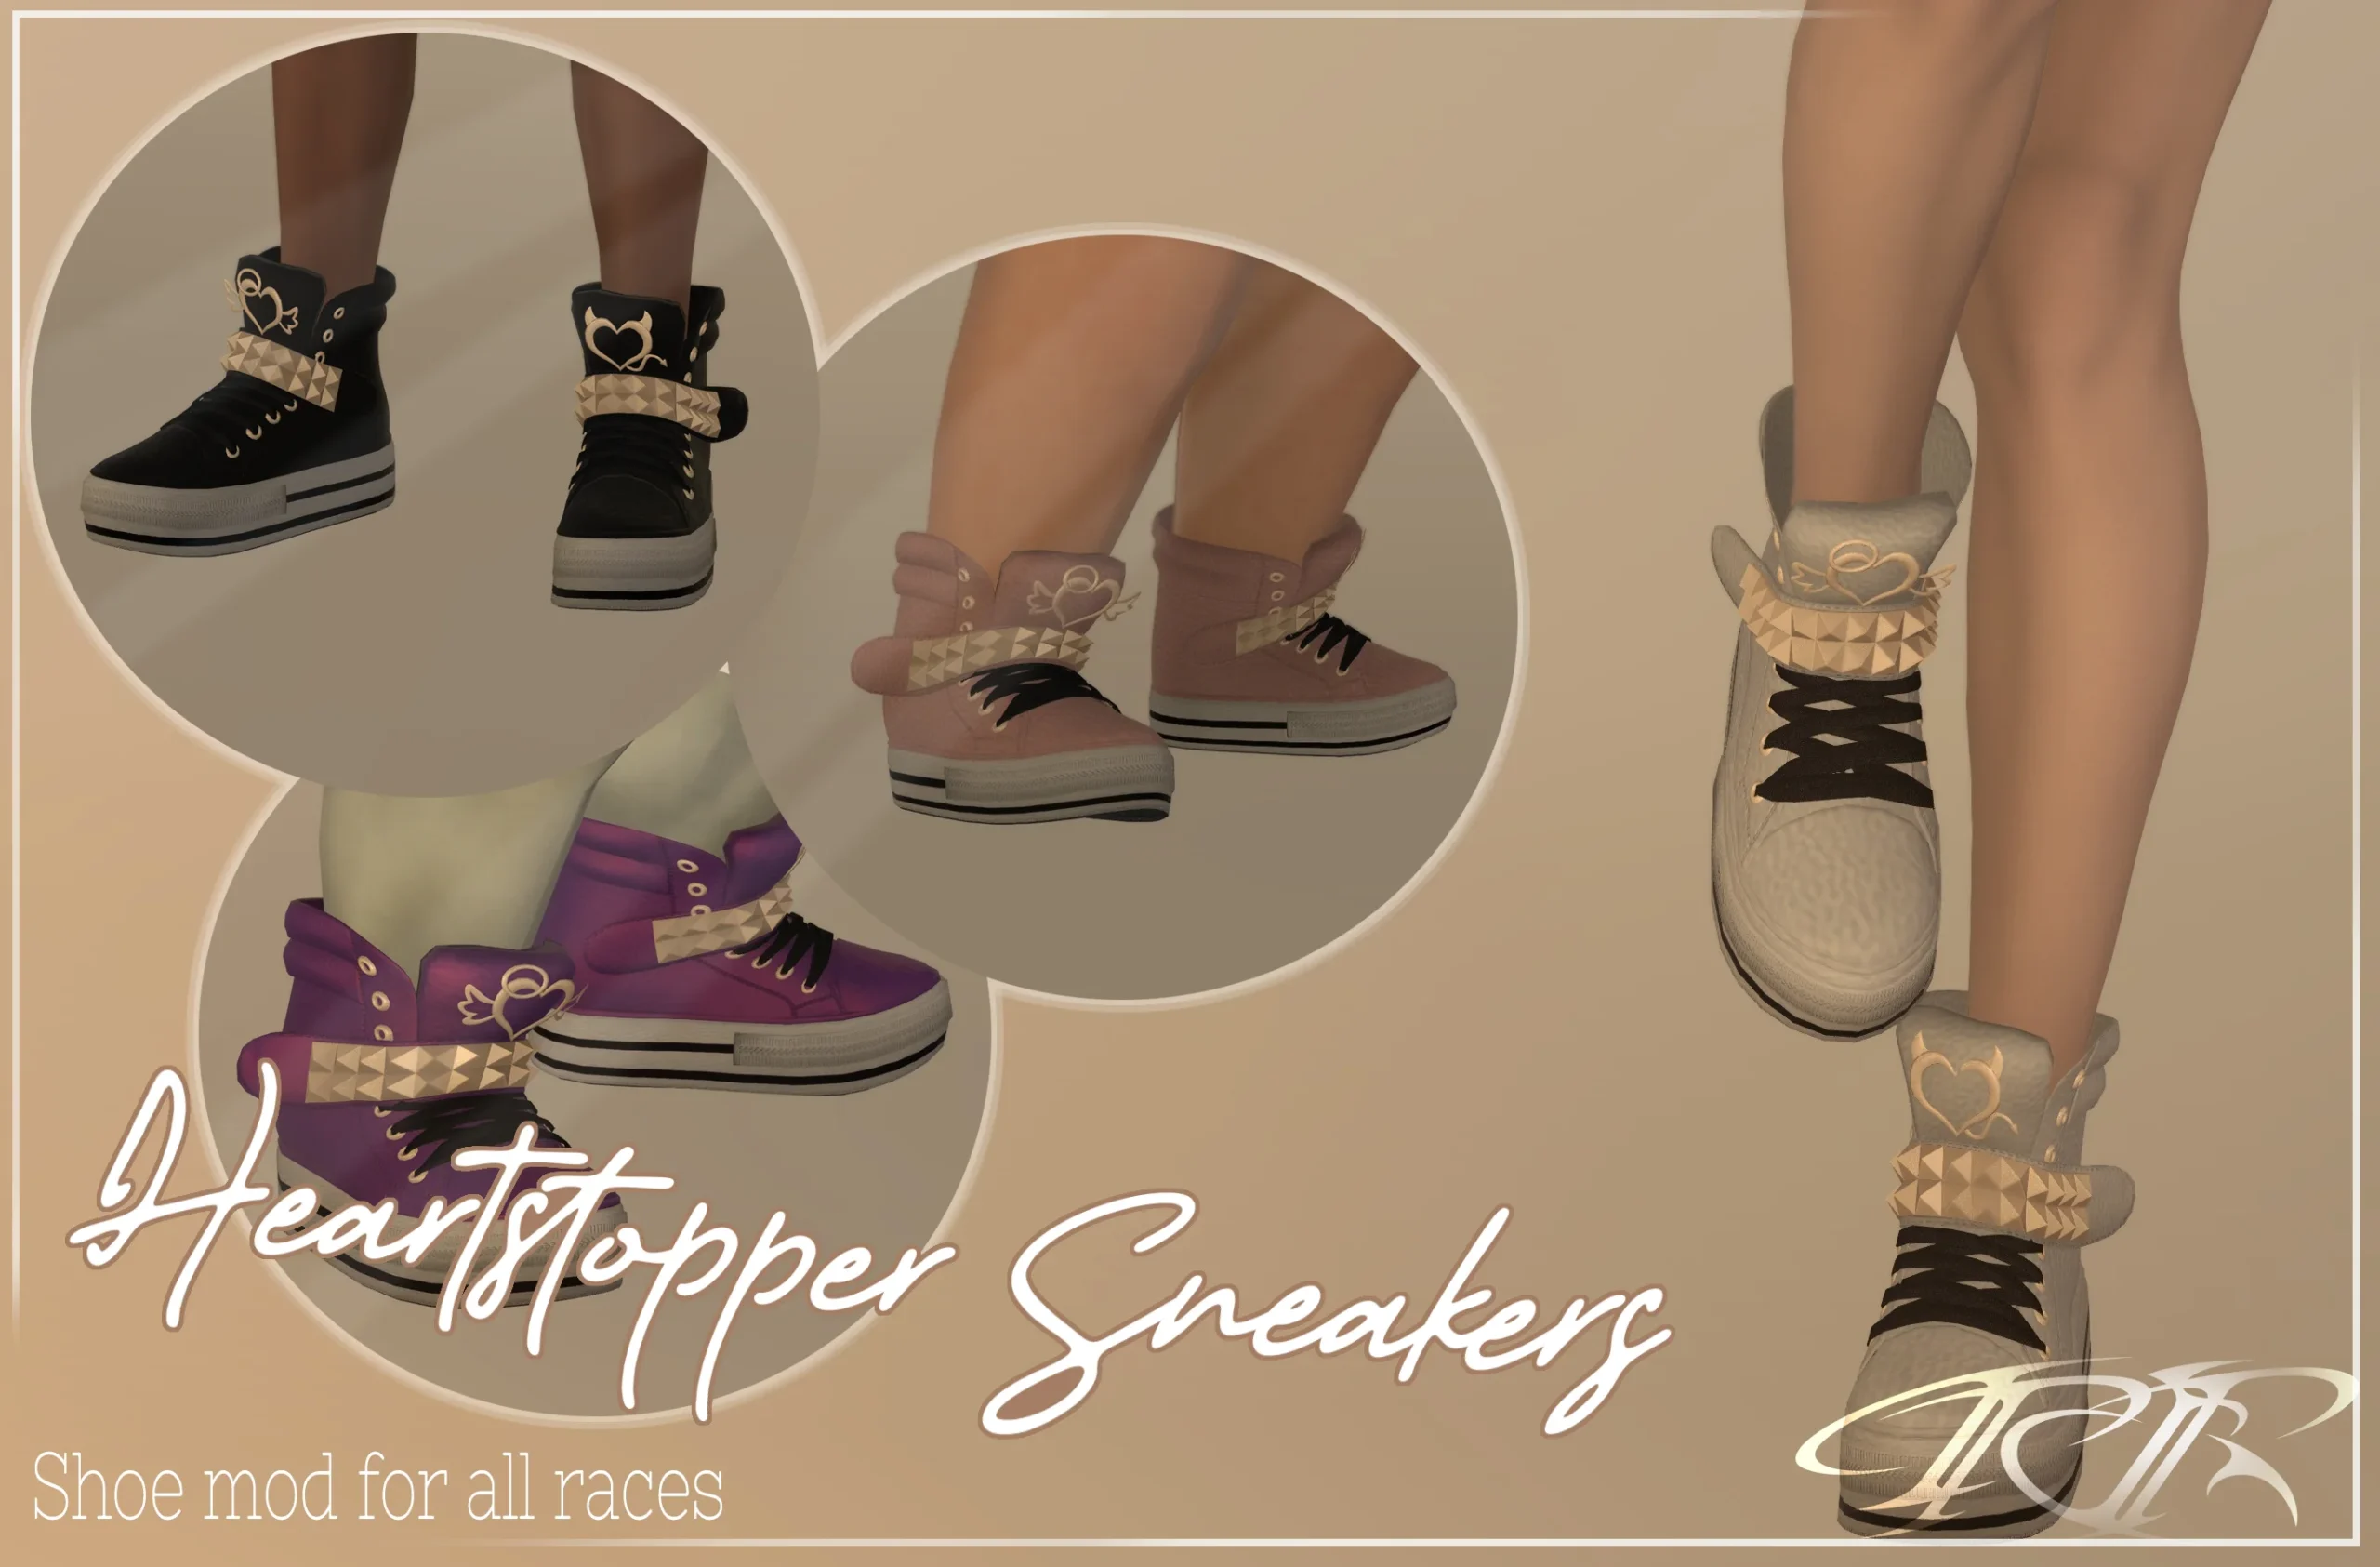 Heartstopper Sneakers - Unvaulted